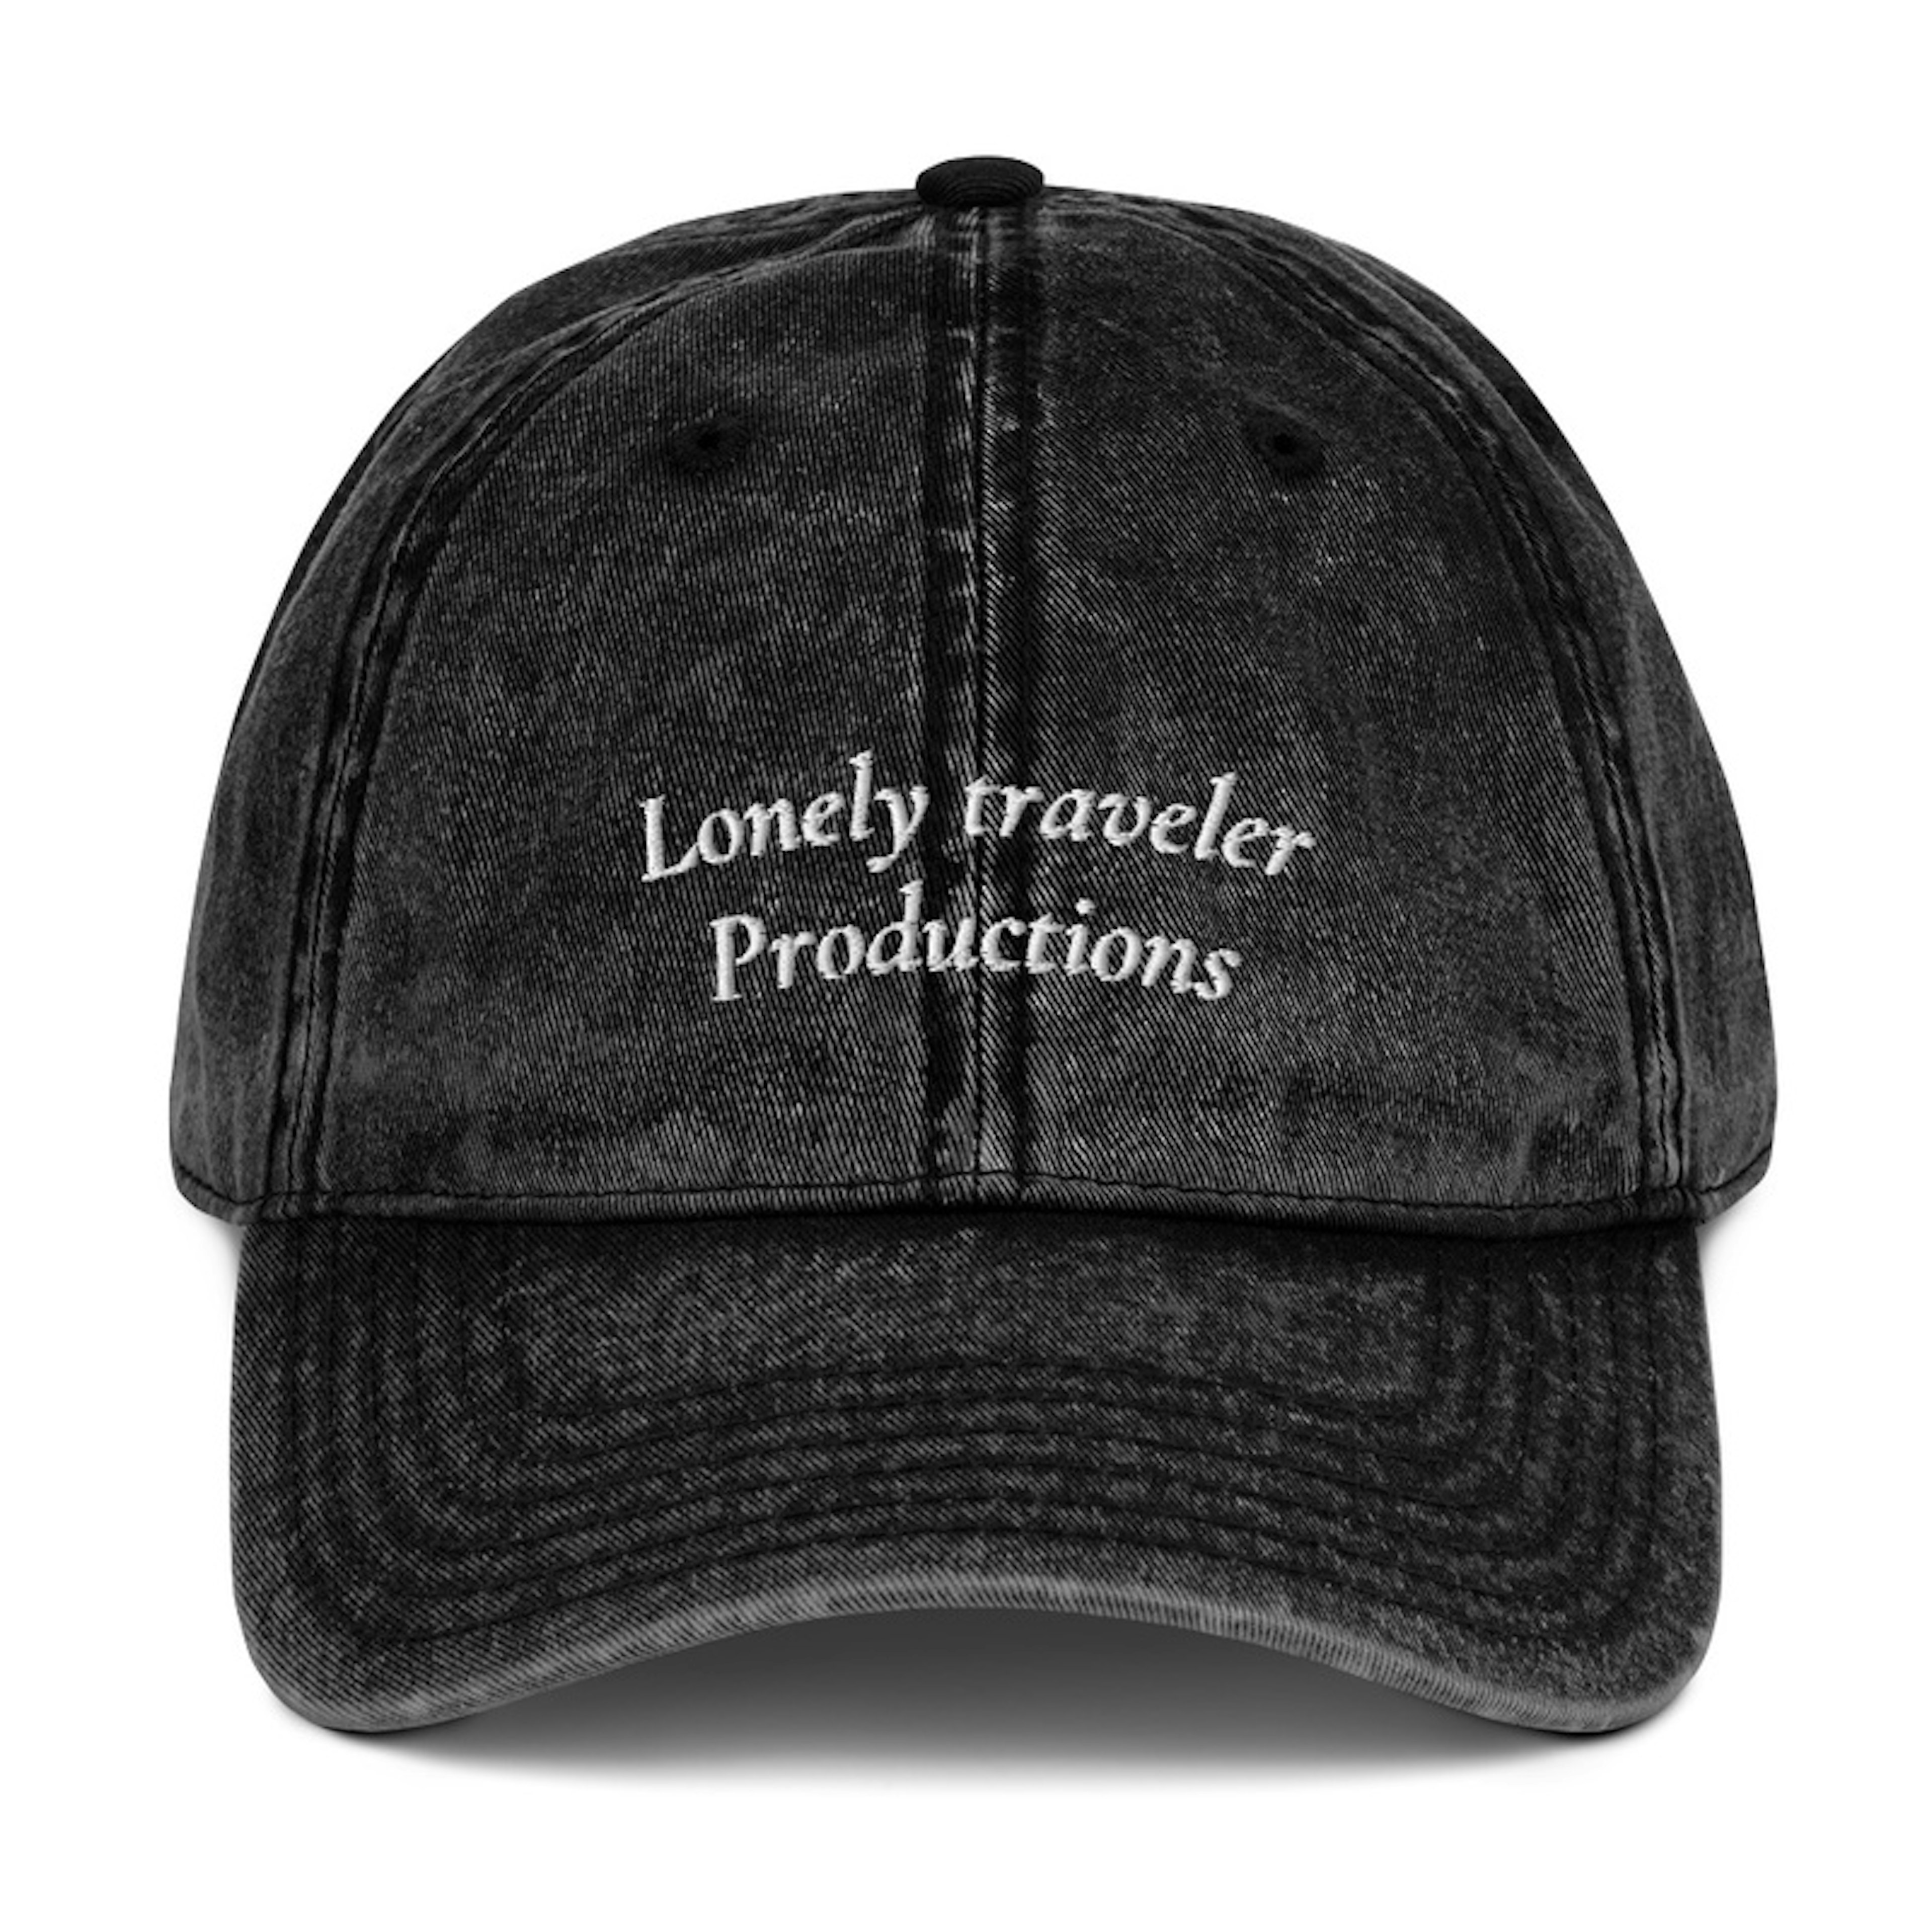 Lonely traveler productions cap